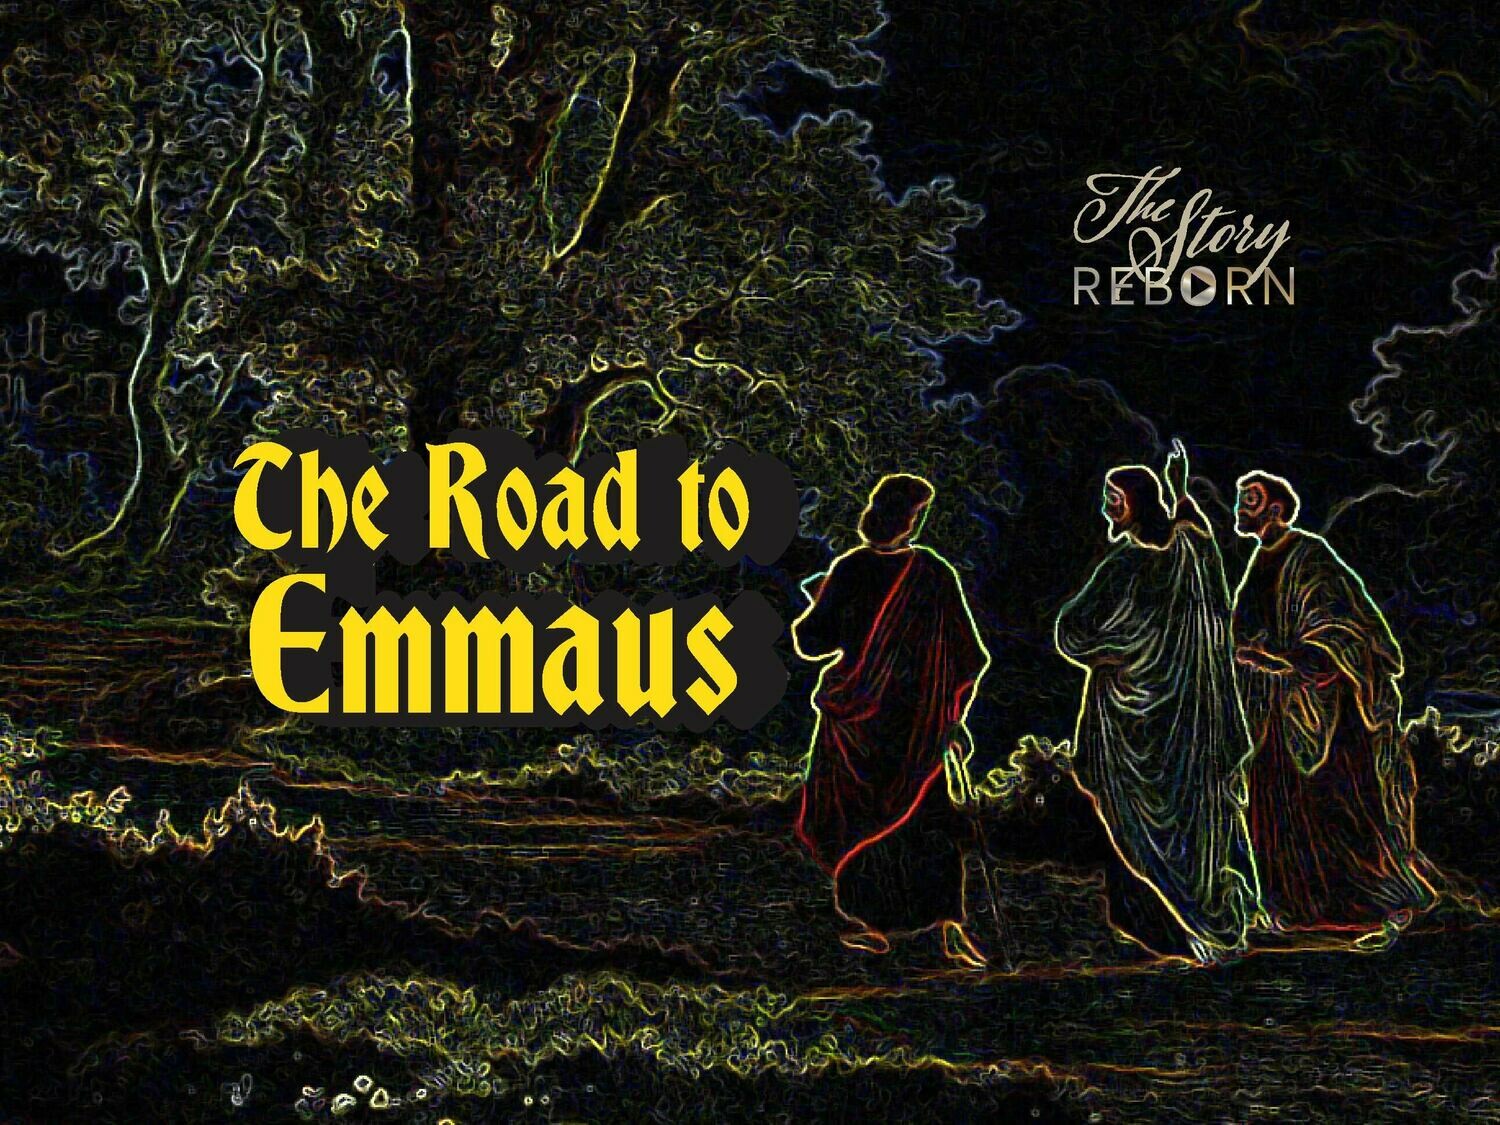 The Story - The Road to Emmaus